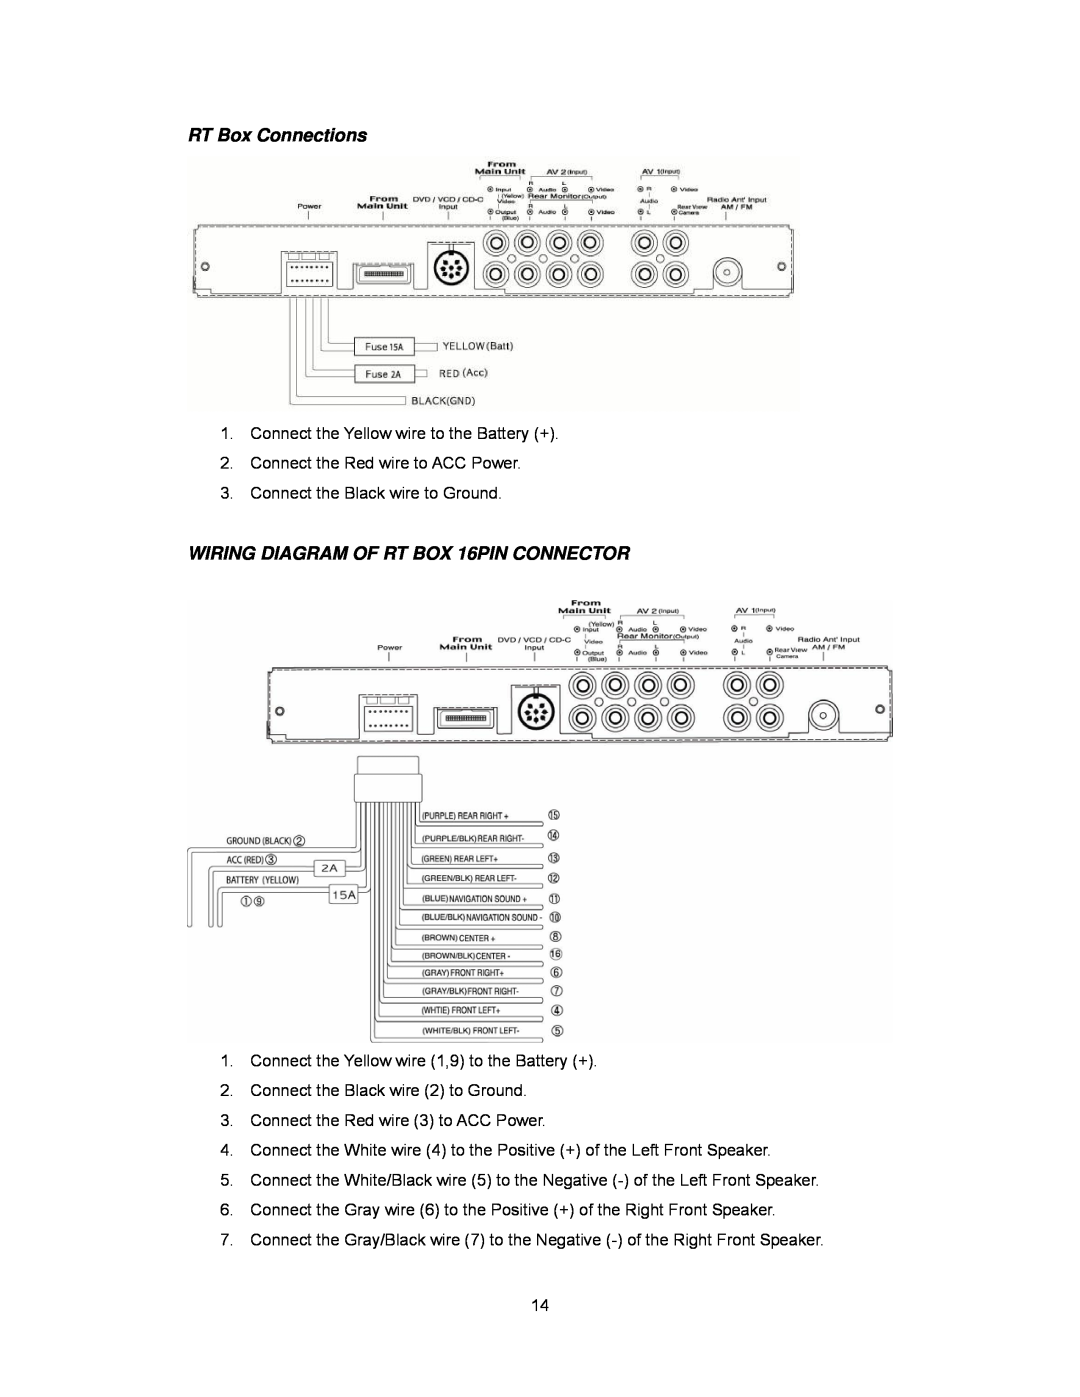 Audiovox PAV2000DTV manual RT Box Connections, WIRING DIAGRAM OF RT BOX 16PIN CONNECTOR 